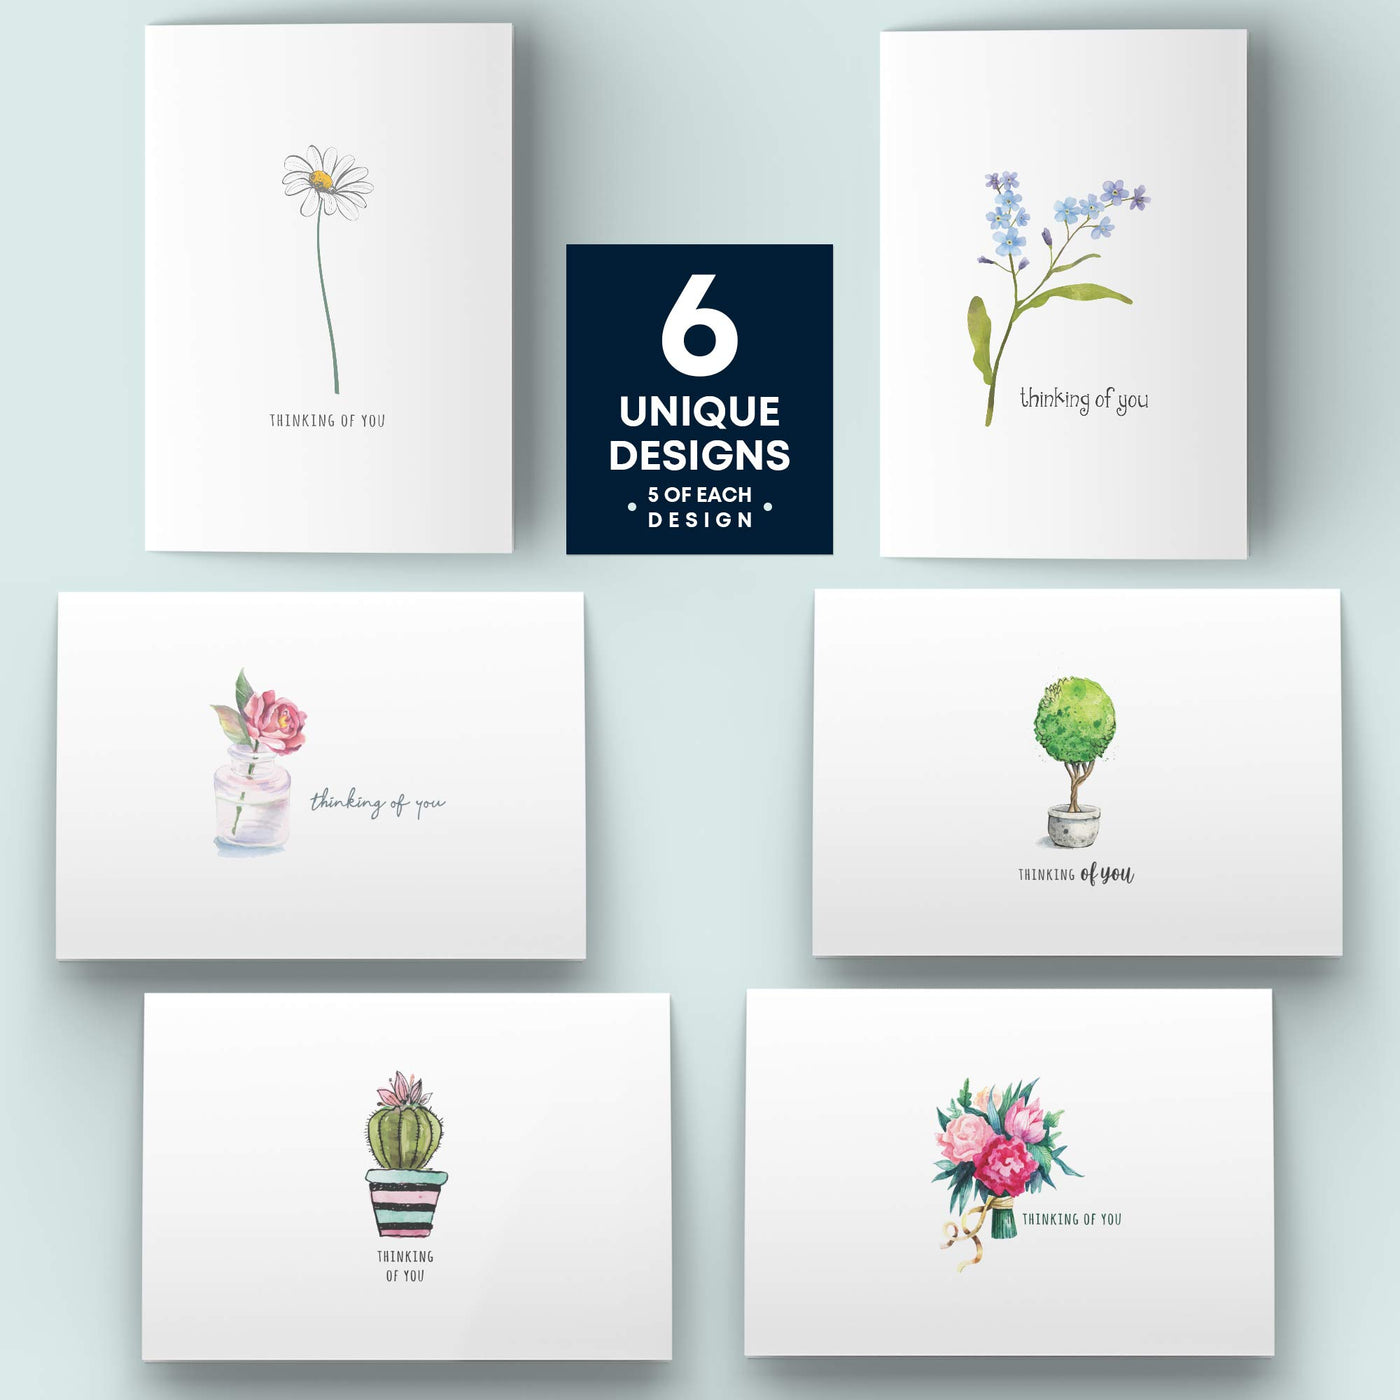 Dessie 30 Thinking of You Cards With Envelopes. 30 4x6 Inch Note Cards with Envelopes - Blank Inside with 6 Unique Floral Designs. White & Colorful Envelopes and Gold Seals In Sturdy Storage Box